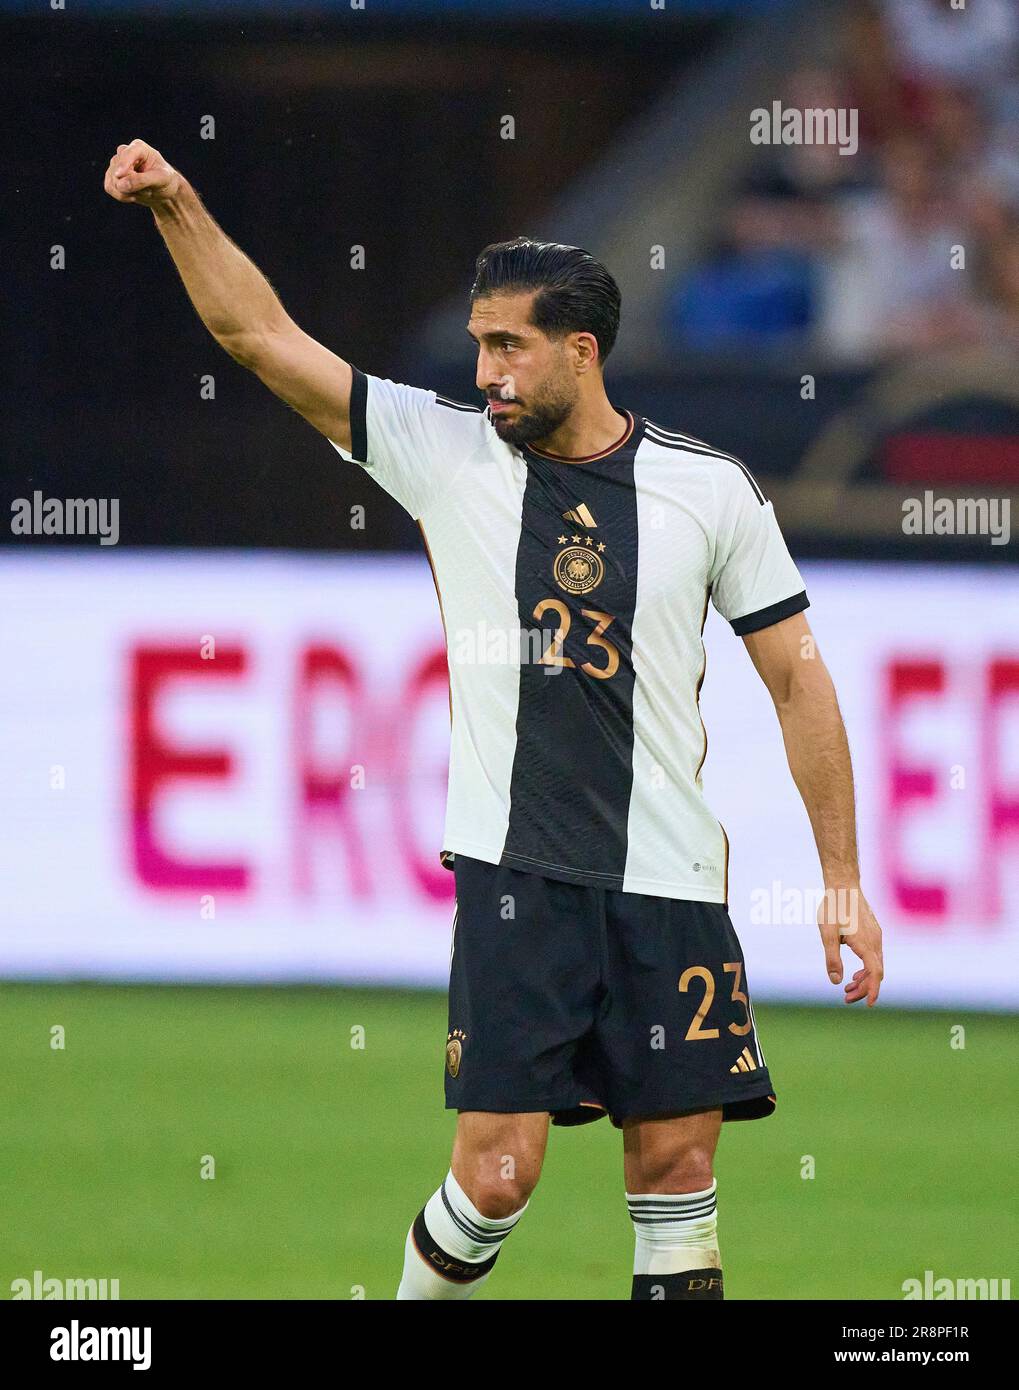 Emre Can, DFB 23  in the friendly match GERMANY - COLUMBIA 0-2 DEUTSCHLAND - KOLUMBIEN 0-2 Preparation for European Championships 2024 in Germany ,Season 2023/2024, on June 20, 2023  in Gelsenkirchen, Germany.  © Peter Schatz / Alamy Live News Stock Photo